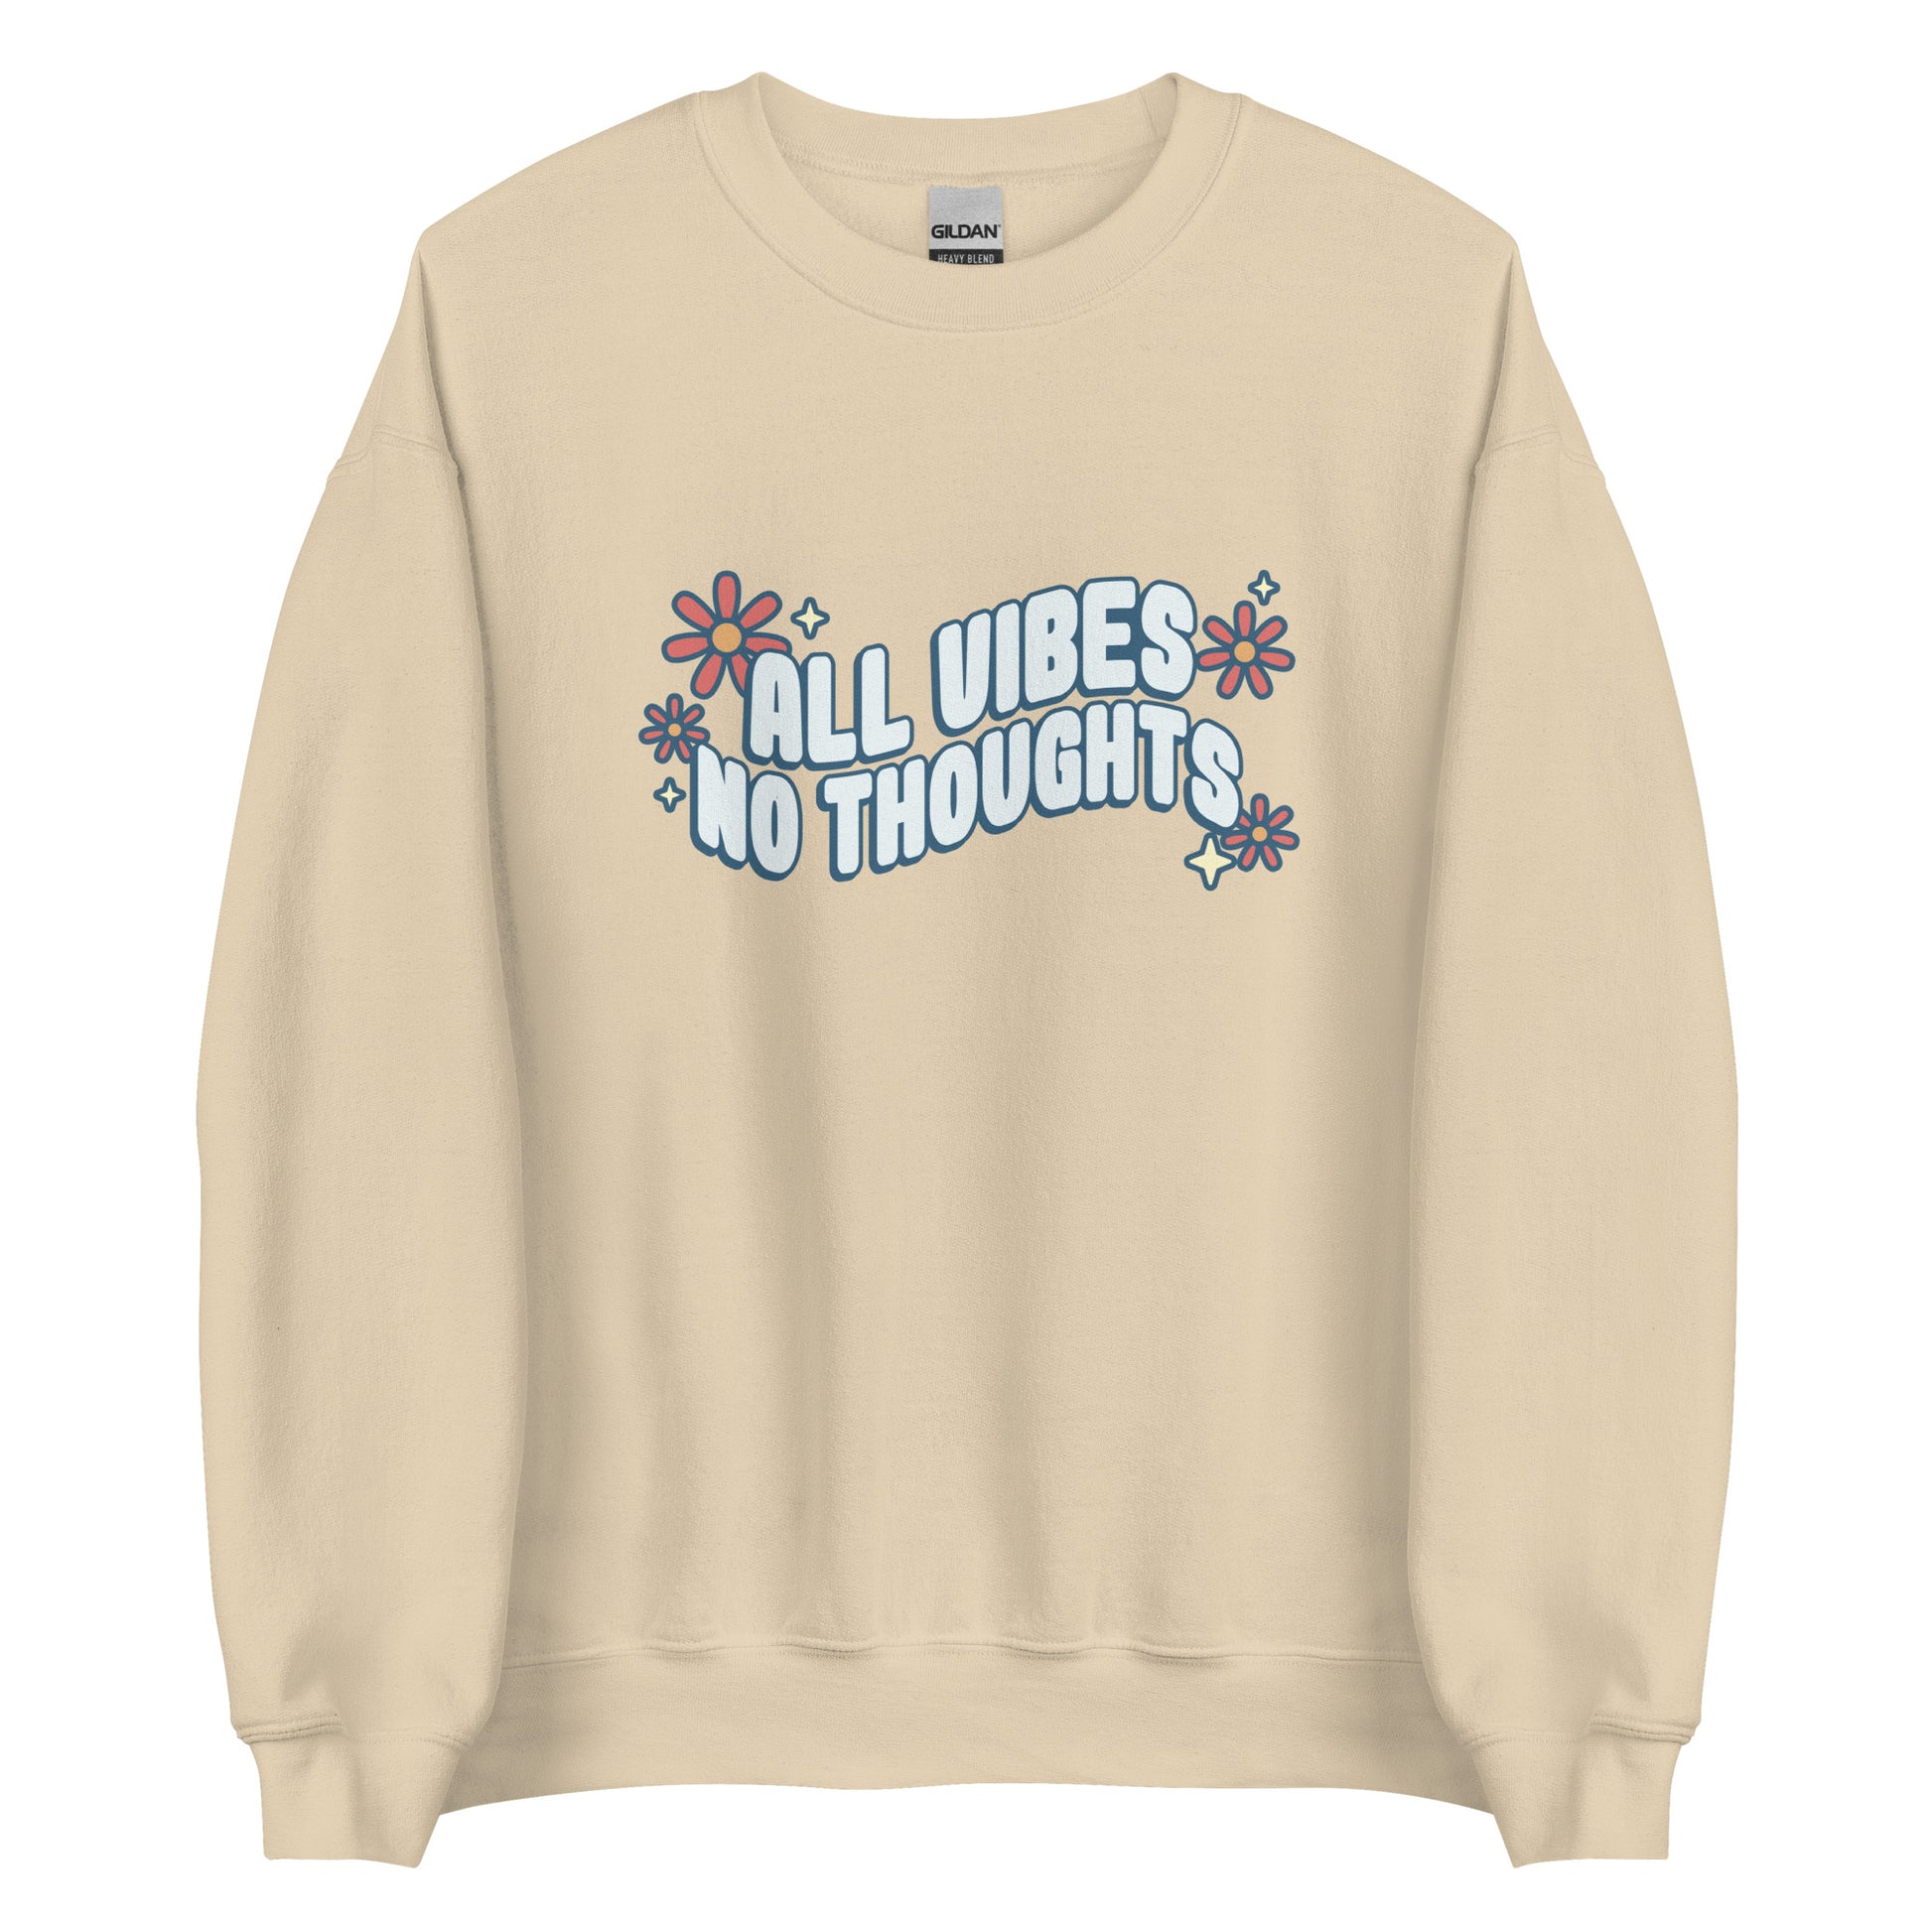 A light beige crewneck sweatshirt featuring text that reads "All vibes, no thoughts". Around the text are a few pink flowers and pale yellow sparkles.